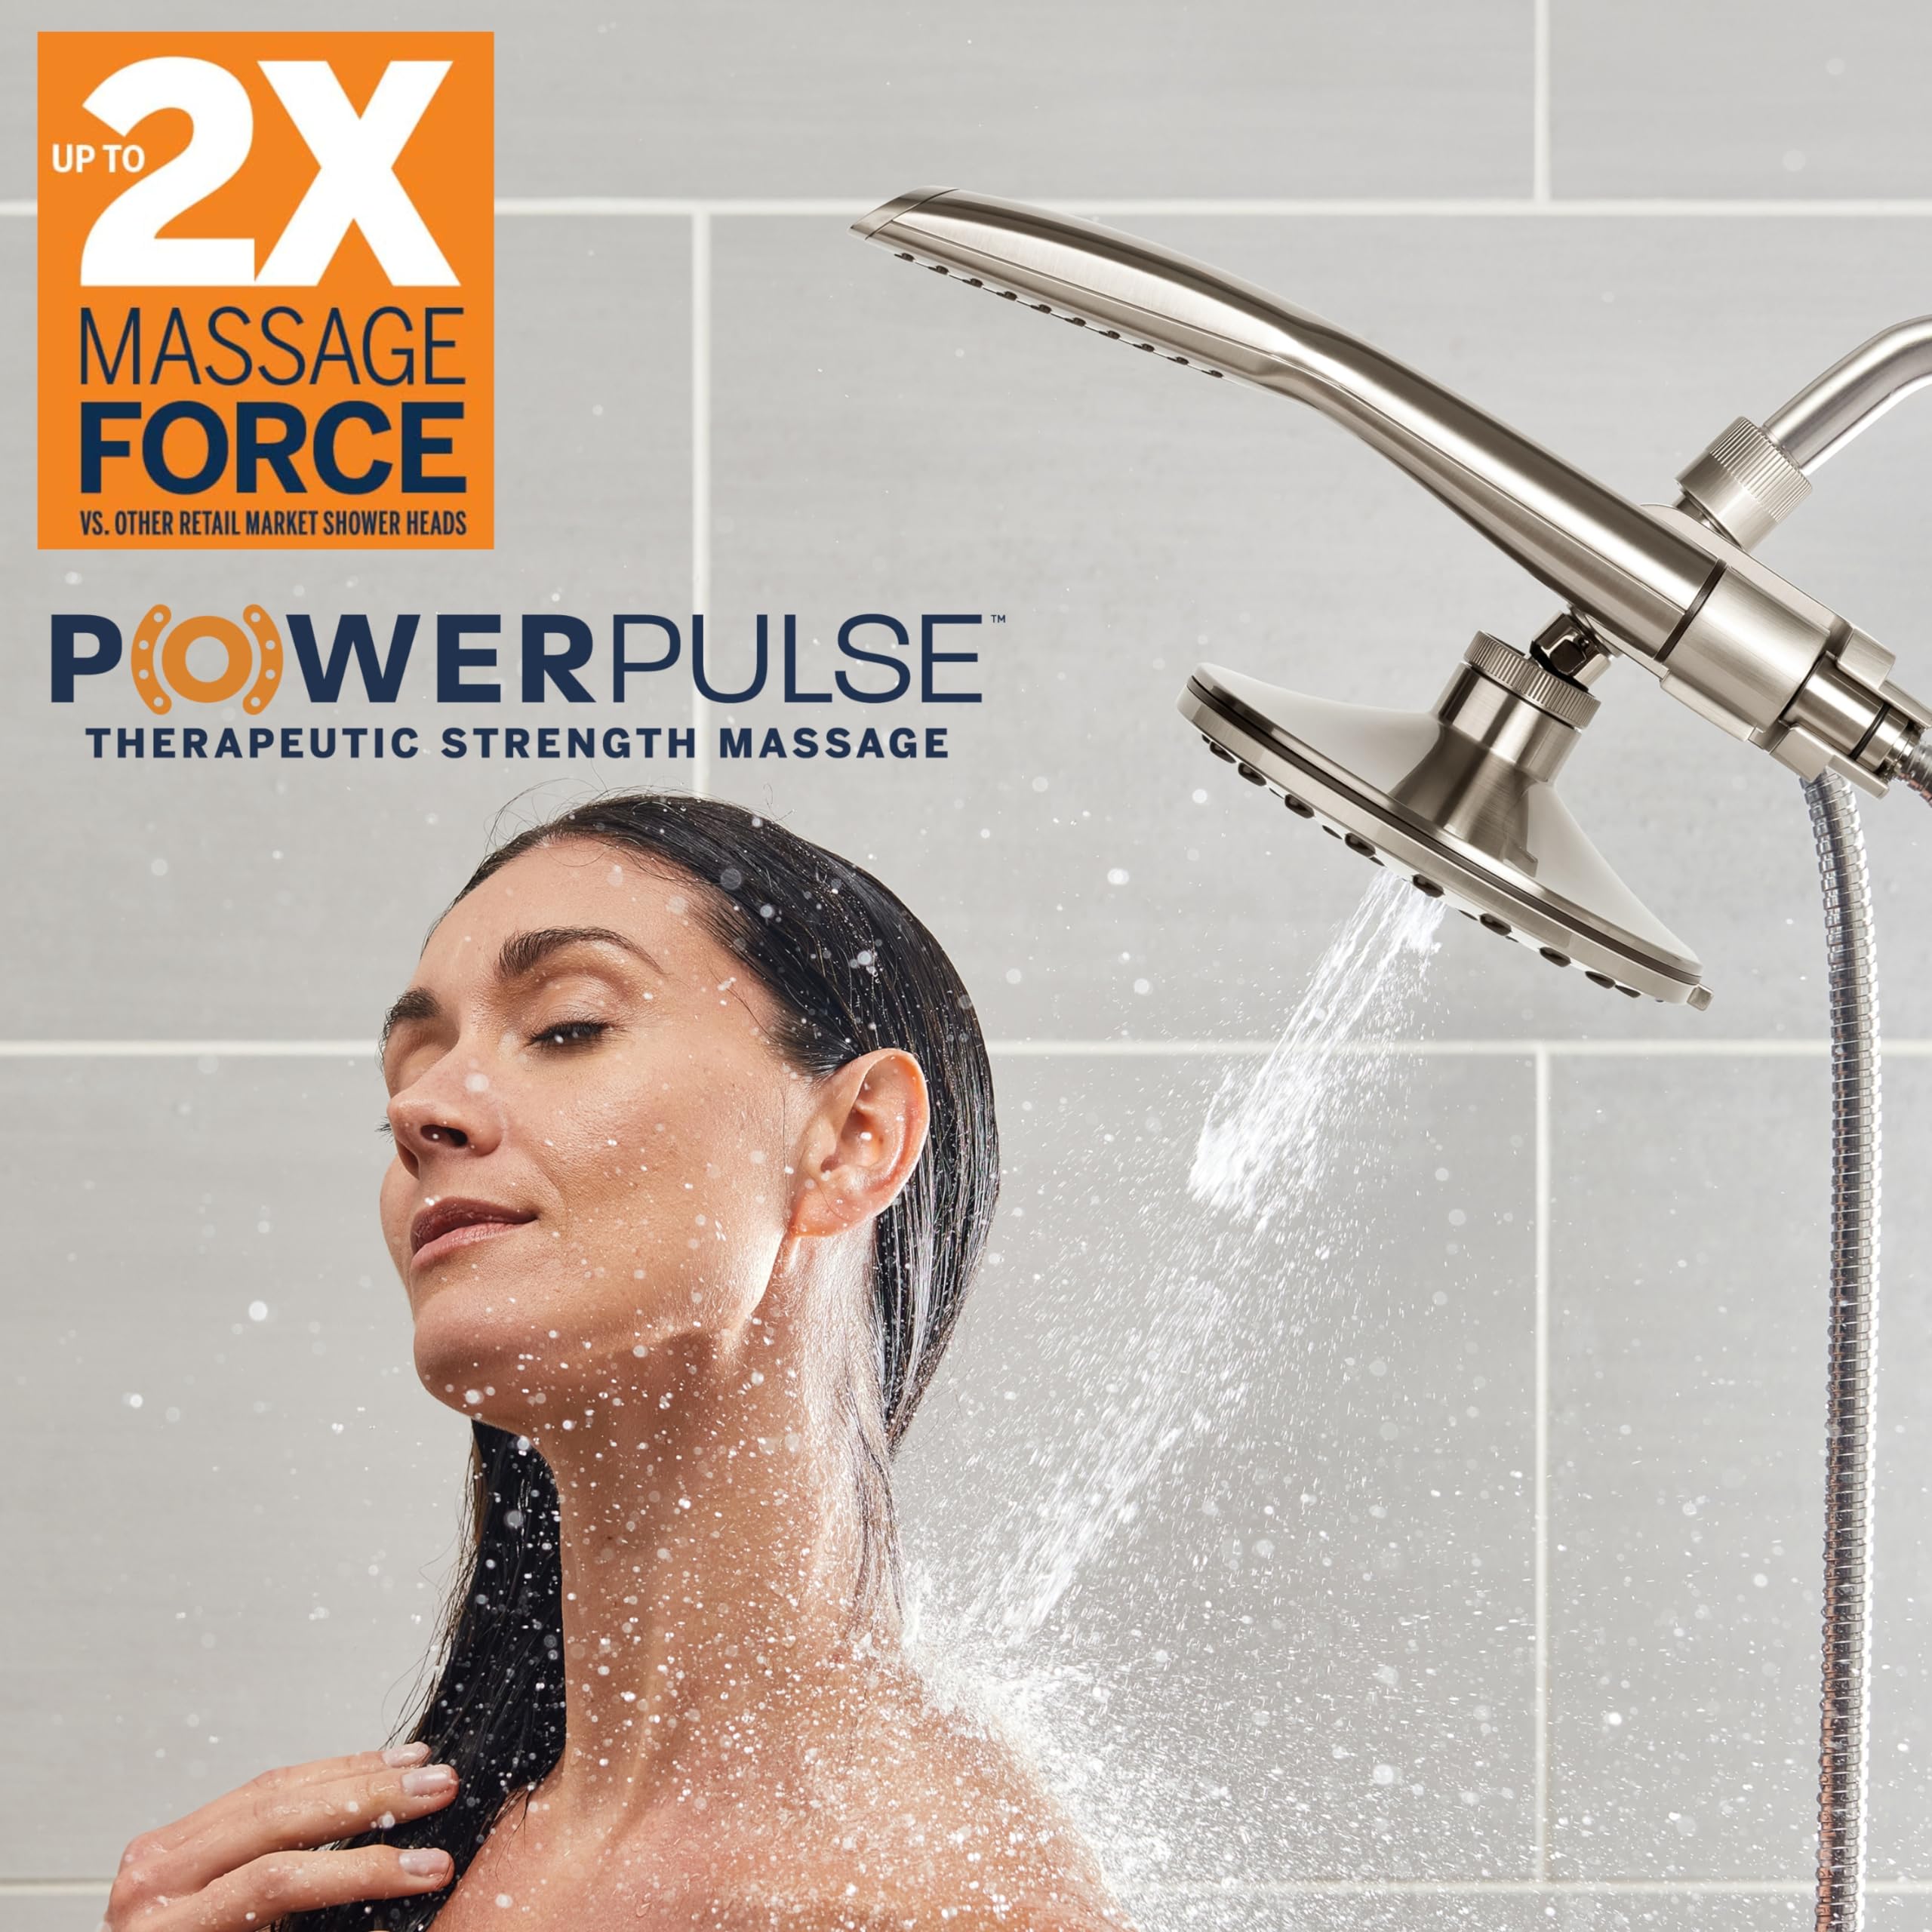 Waterpik High Pressure Pulsating Shower Wand and Rain Shower Head Combo with Extra-Long 8-Foot Metal Hose, HairWand Pulse Spa System 12 Spray Modes for Hair and Body, Brushed Nickel